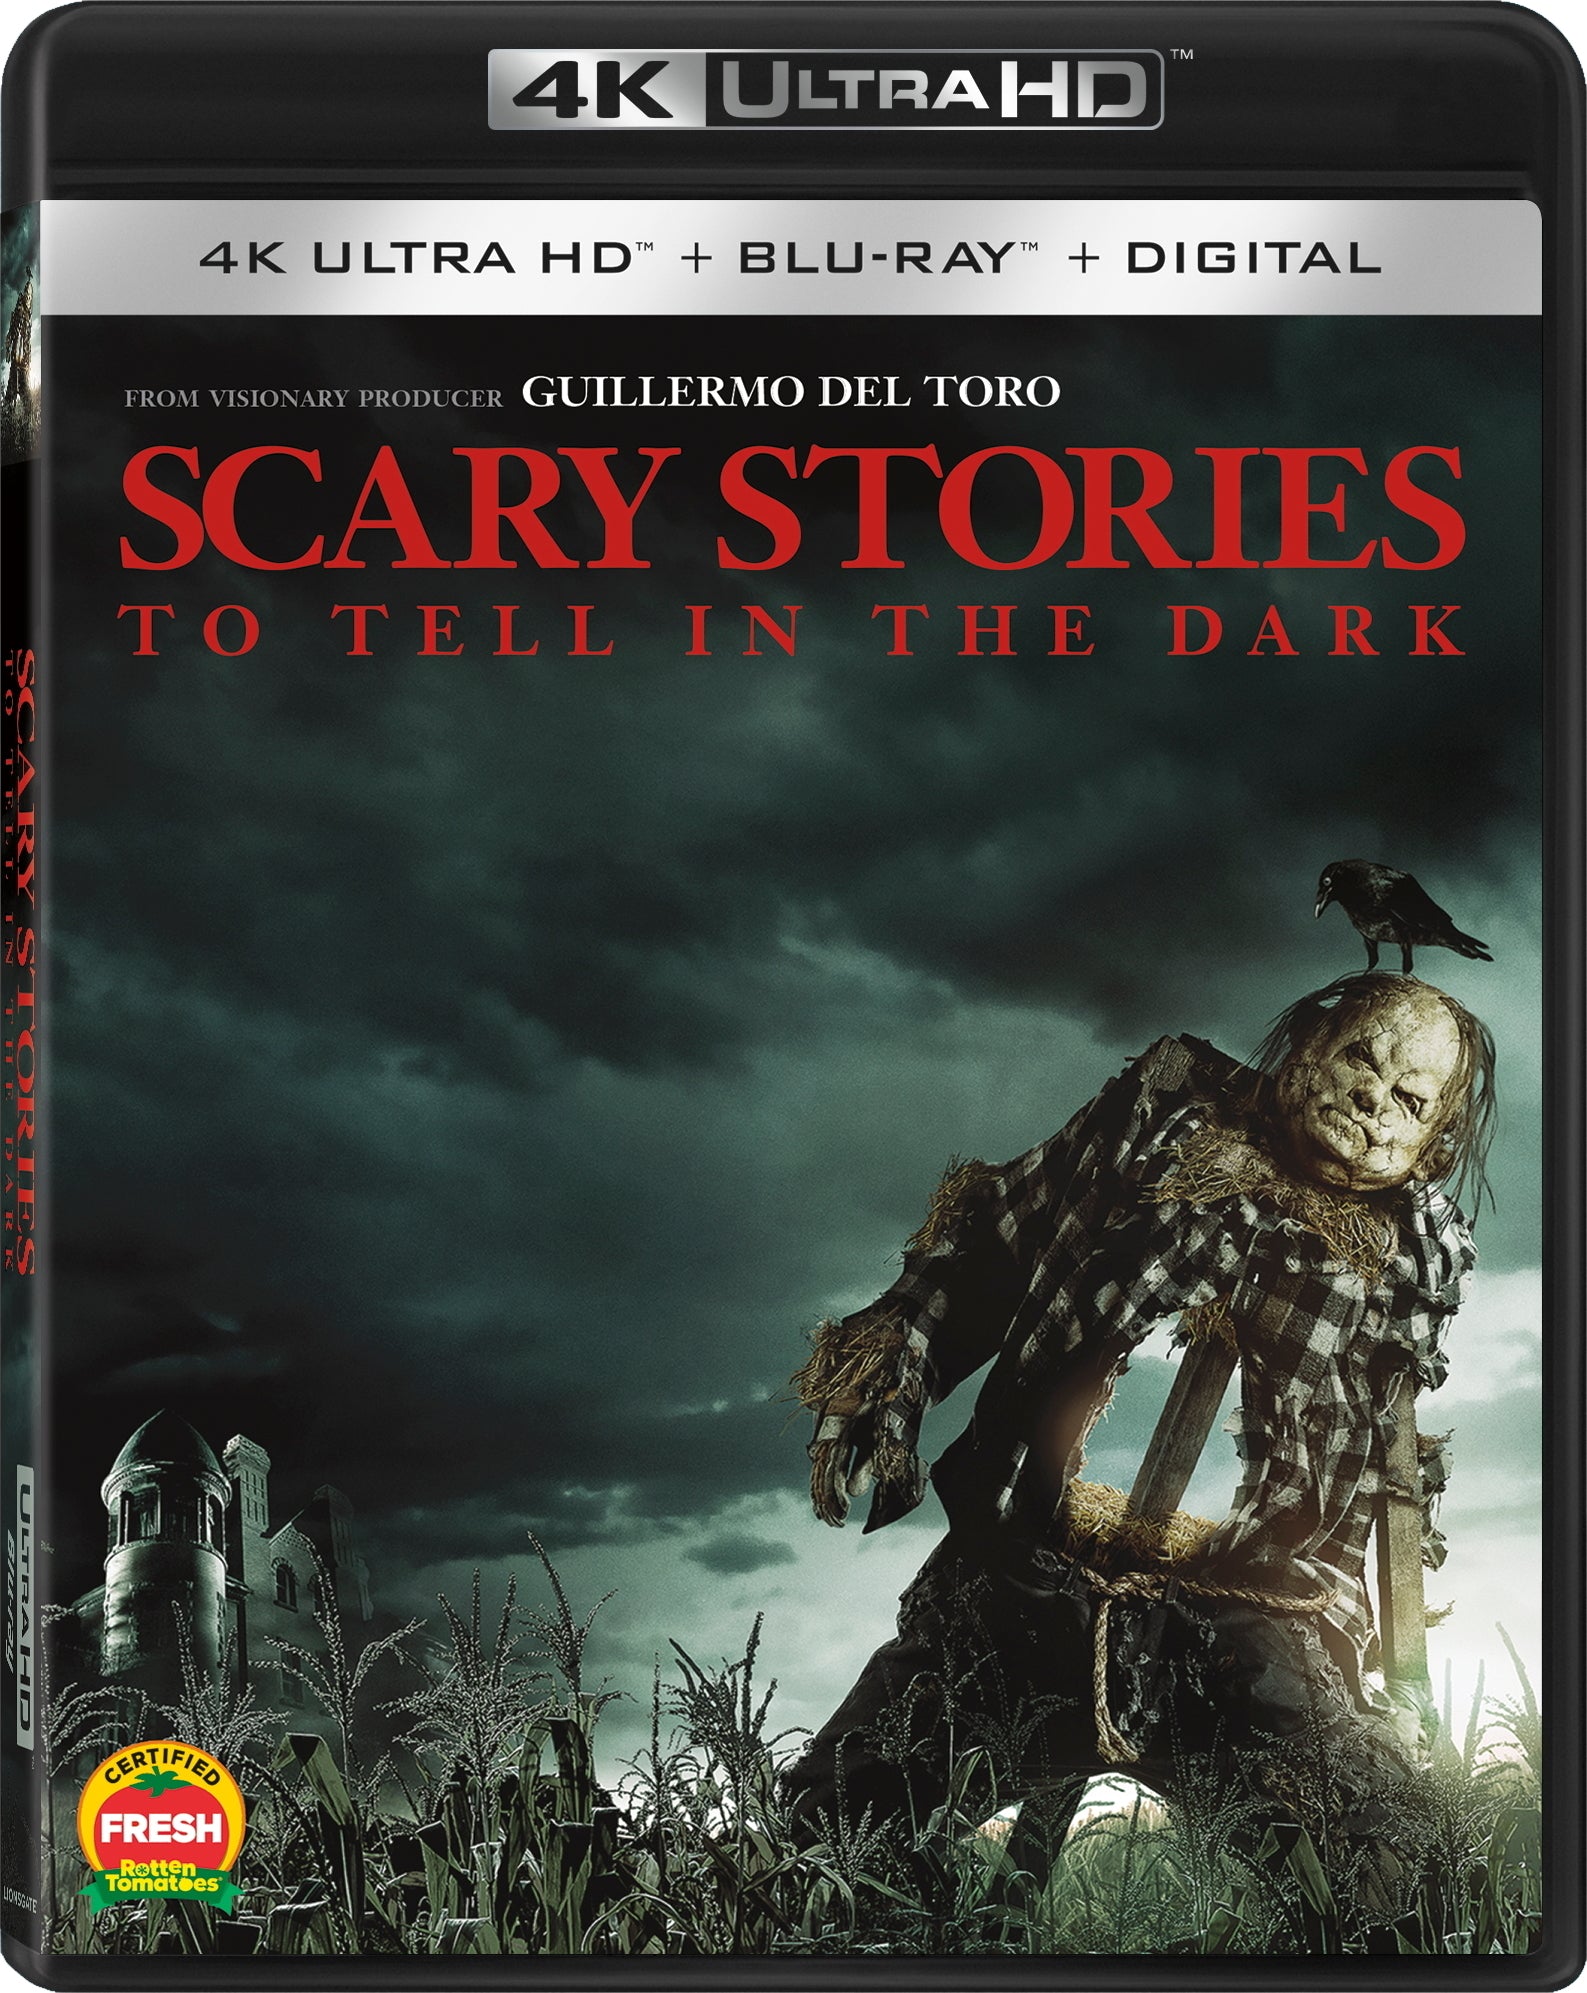 SCARY STORIES TO TELL IN THE DARK 4K UHD/BLU-RAY